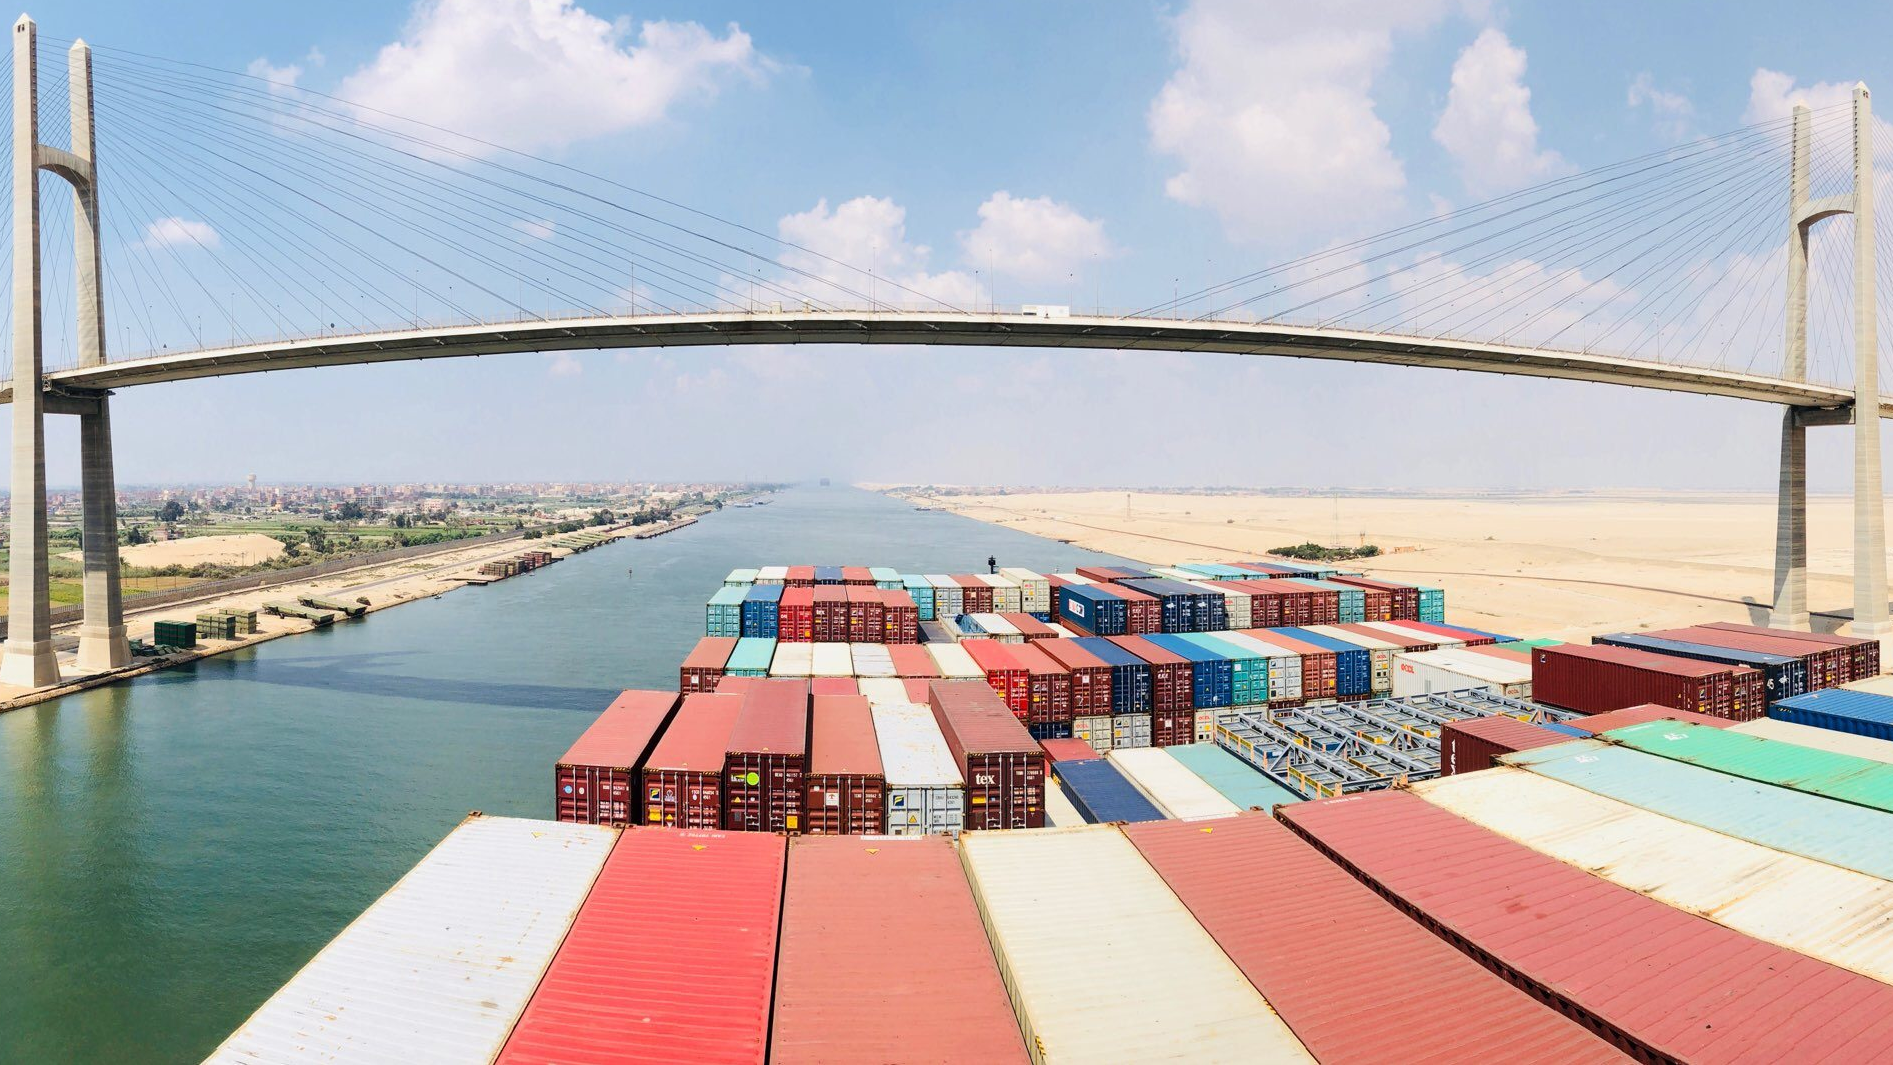 Egypt's Suez Canal tugboats working to move stranded container ship